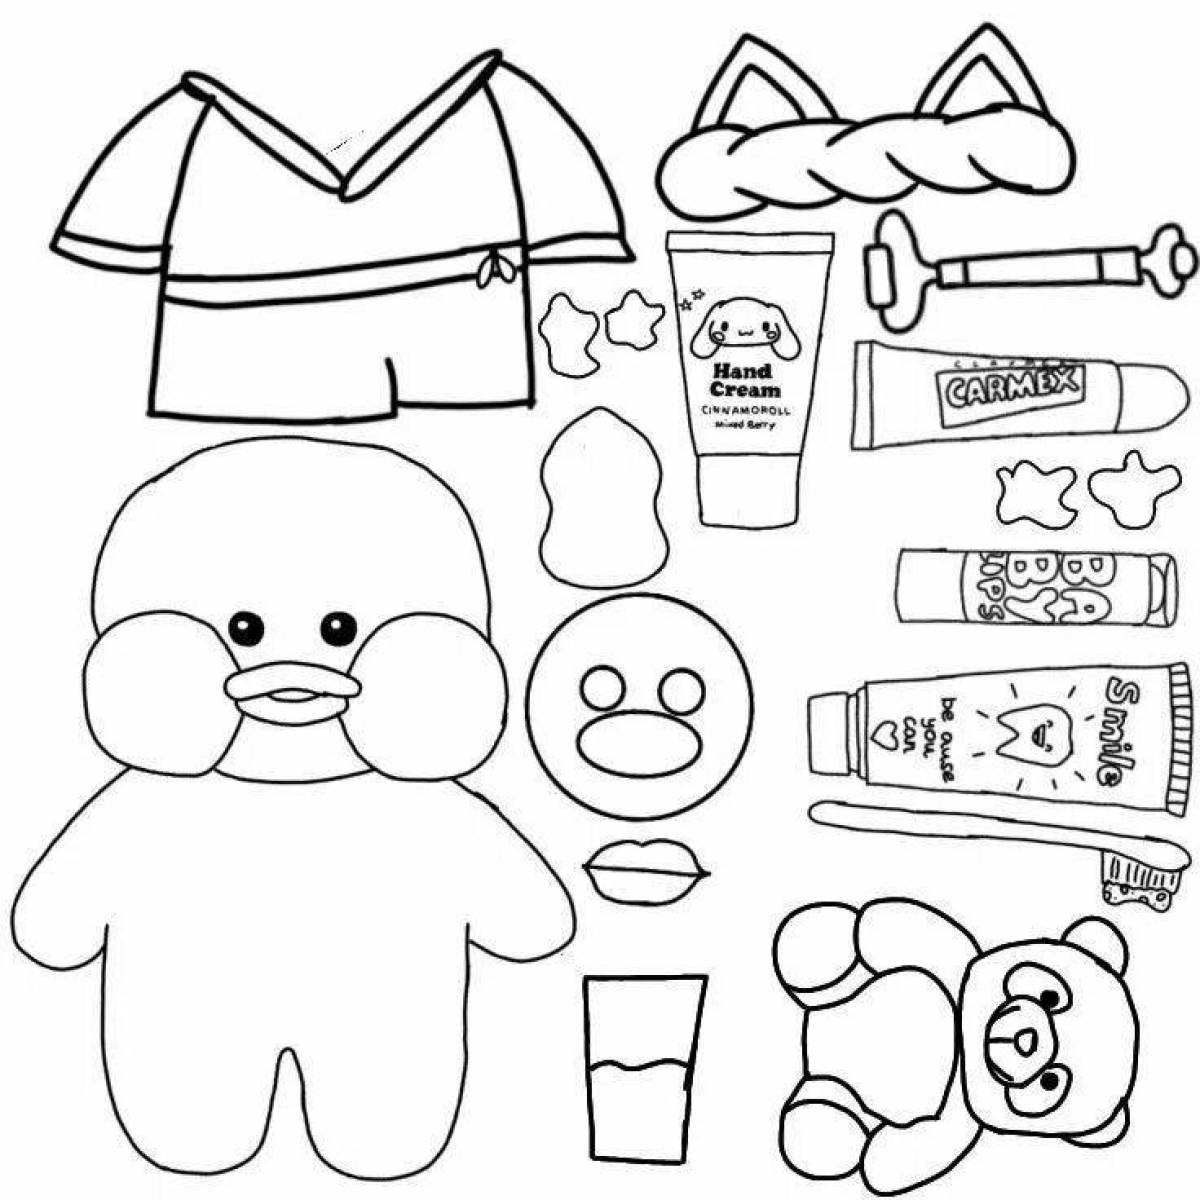 Lolofan duck coloring book in color pack